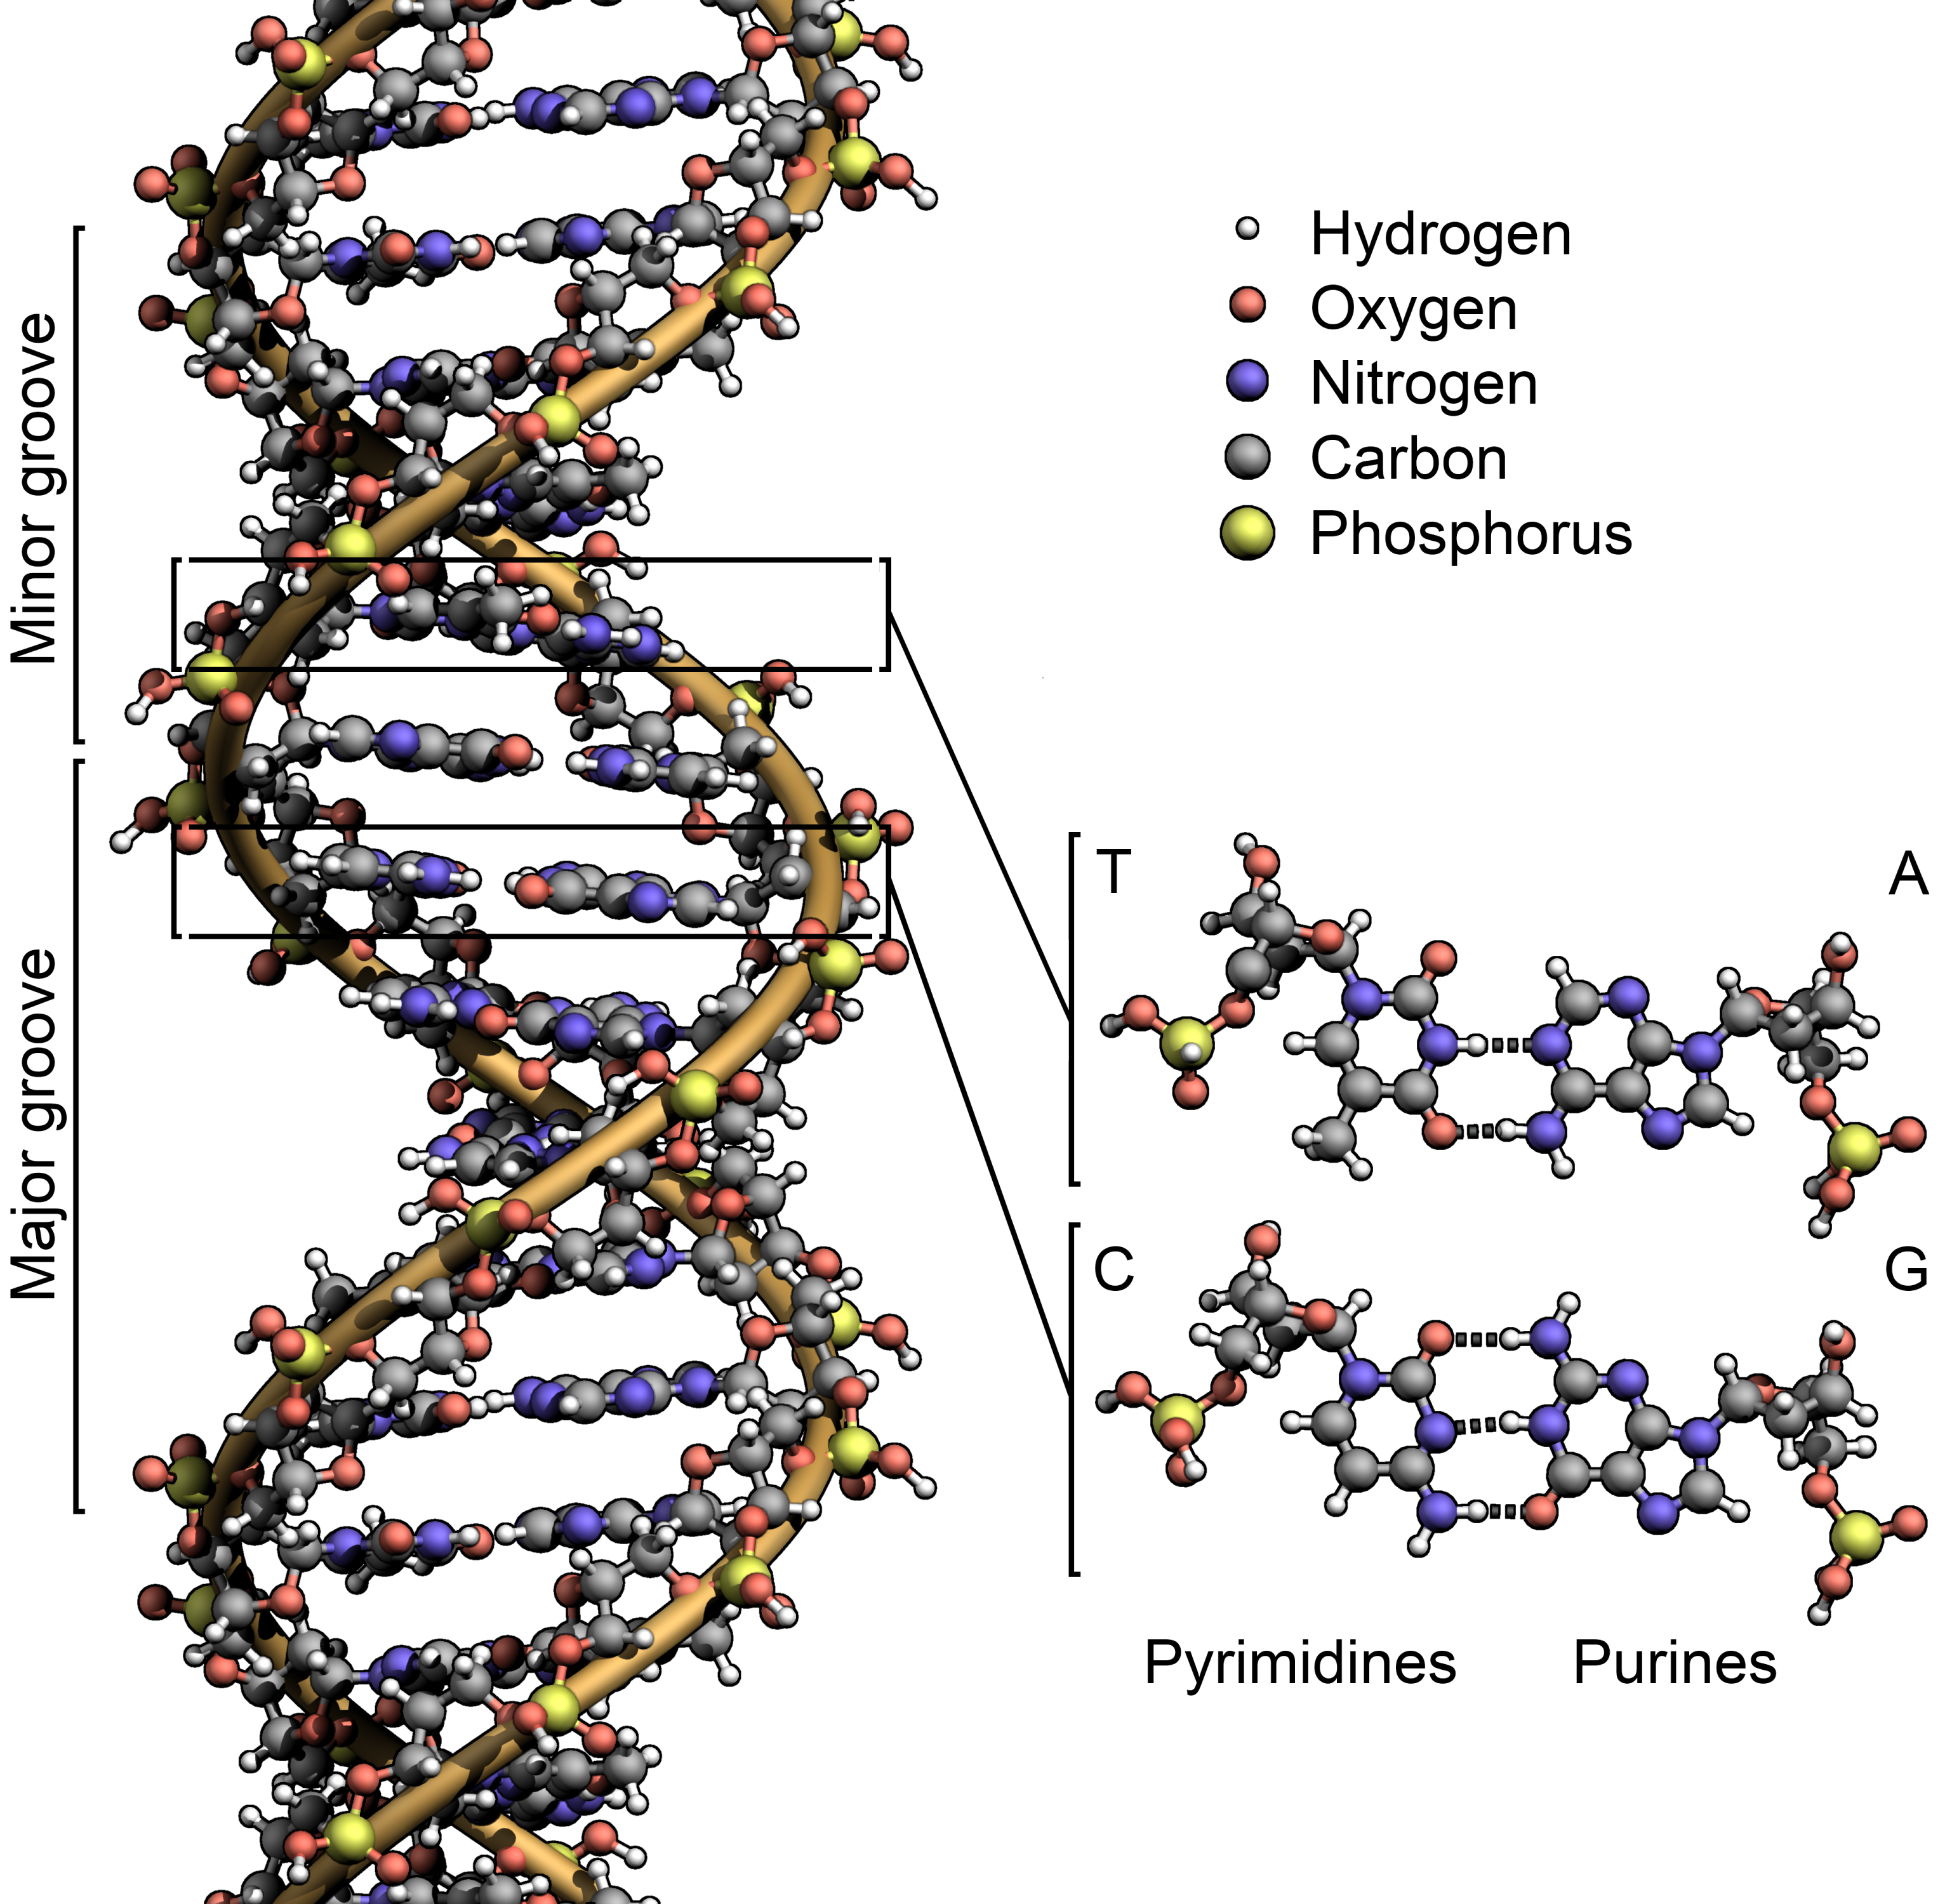  https://commons.wikimedia.org/wiki/File:Difference_DNA_RNA-EN.svg